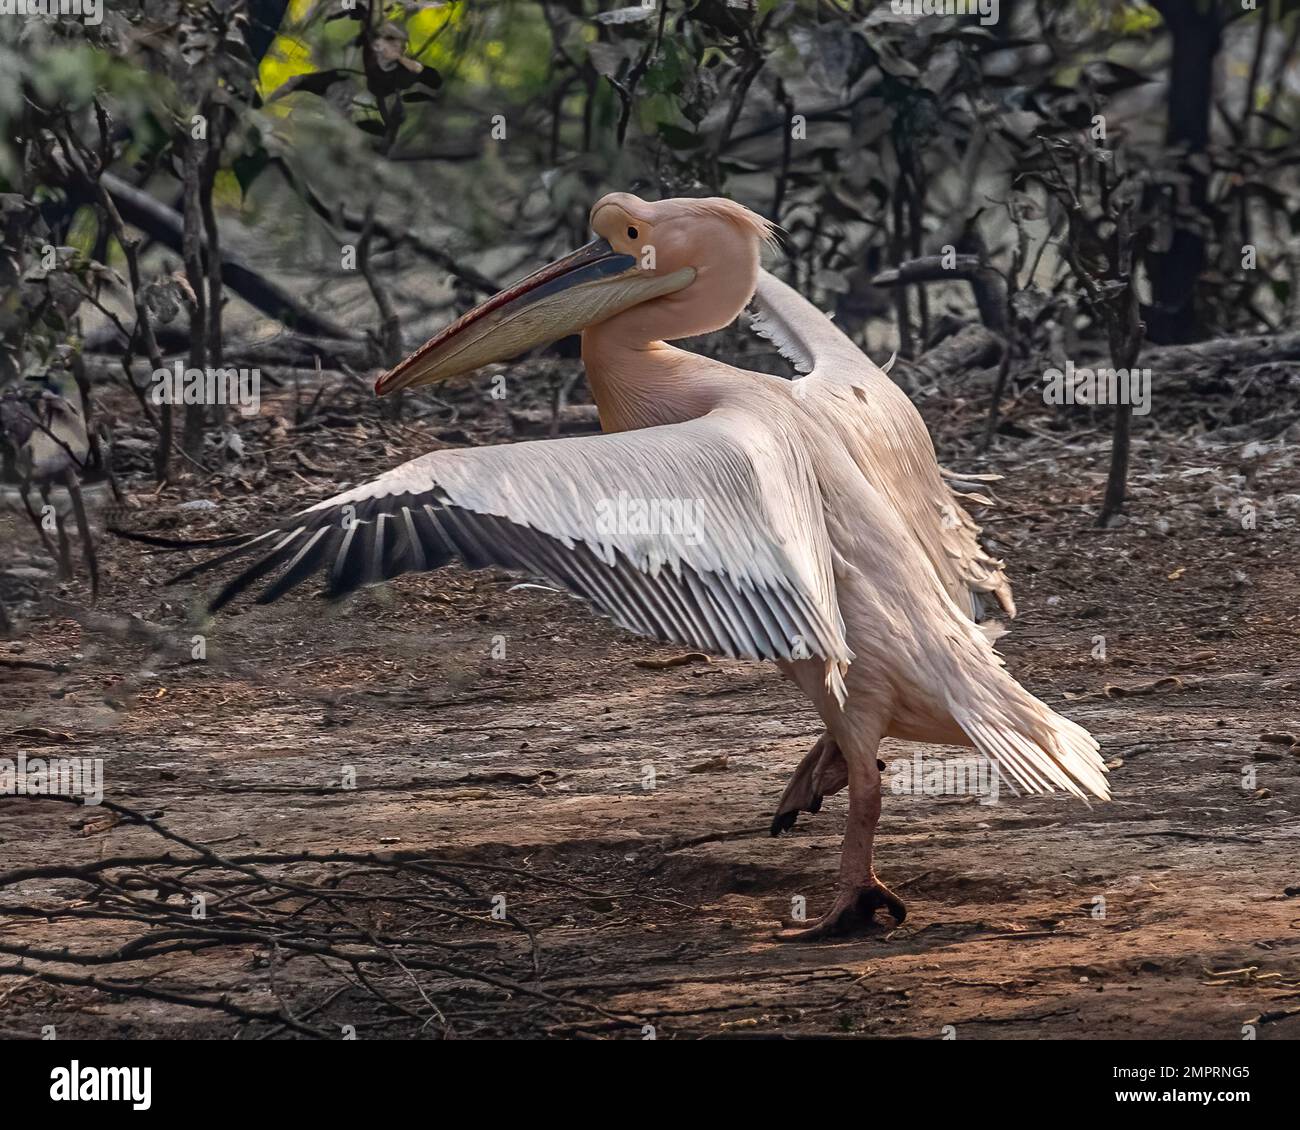 A dancing pink pelican on ground Stock Photo